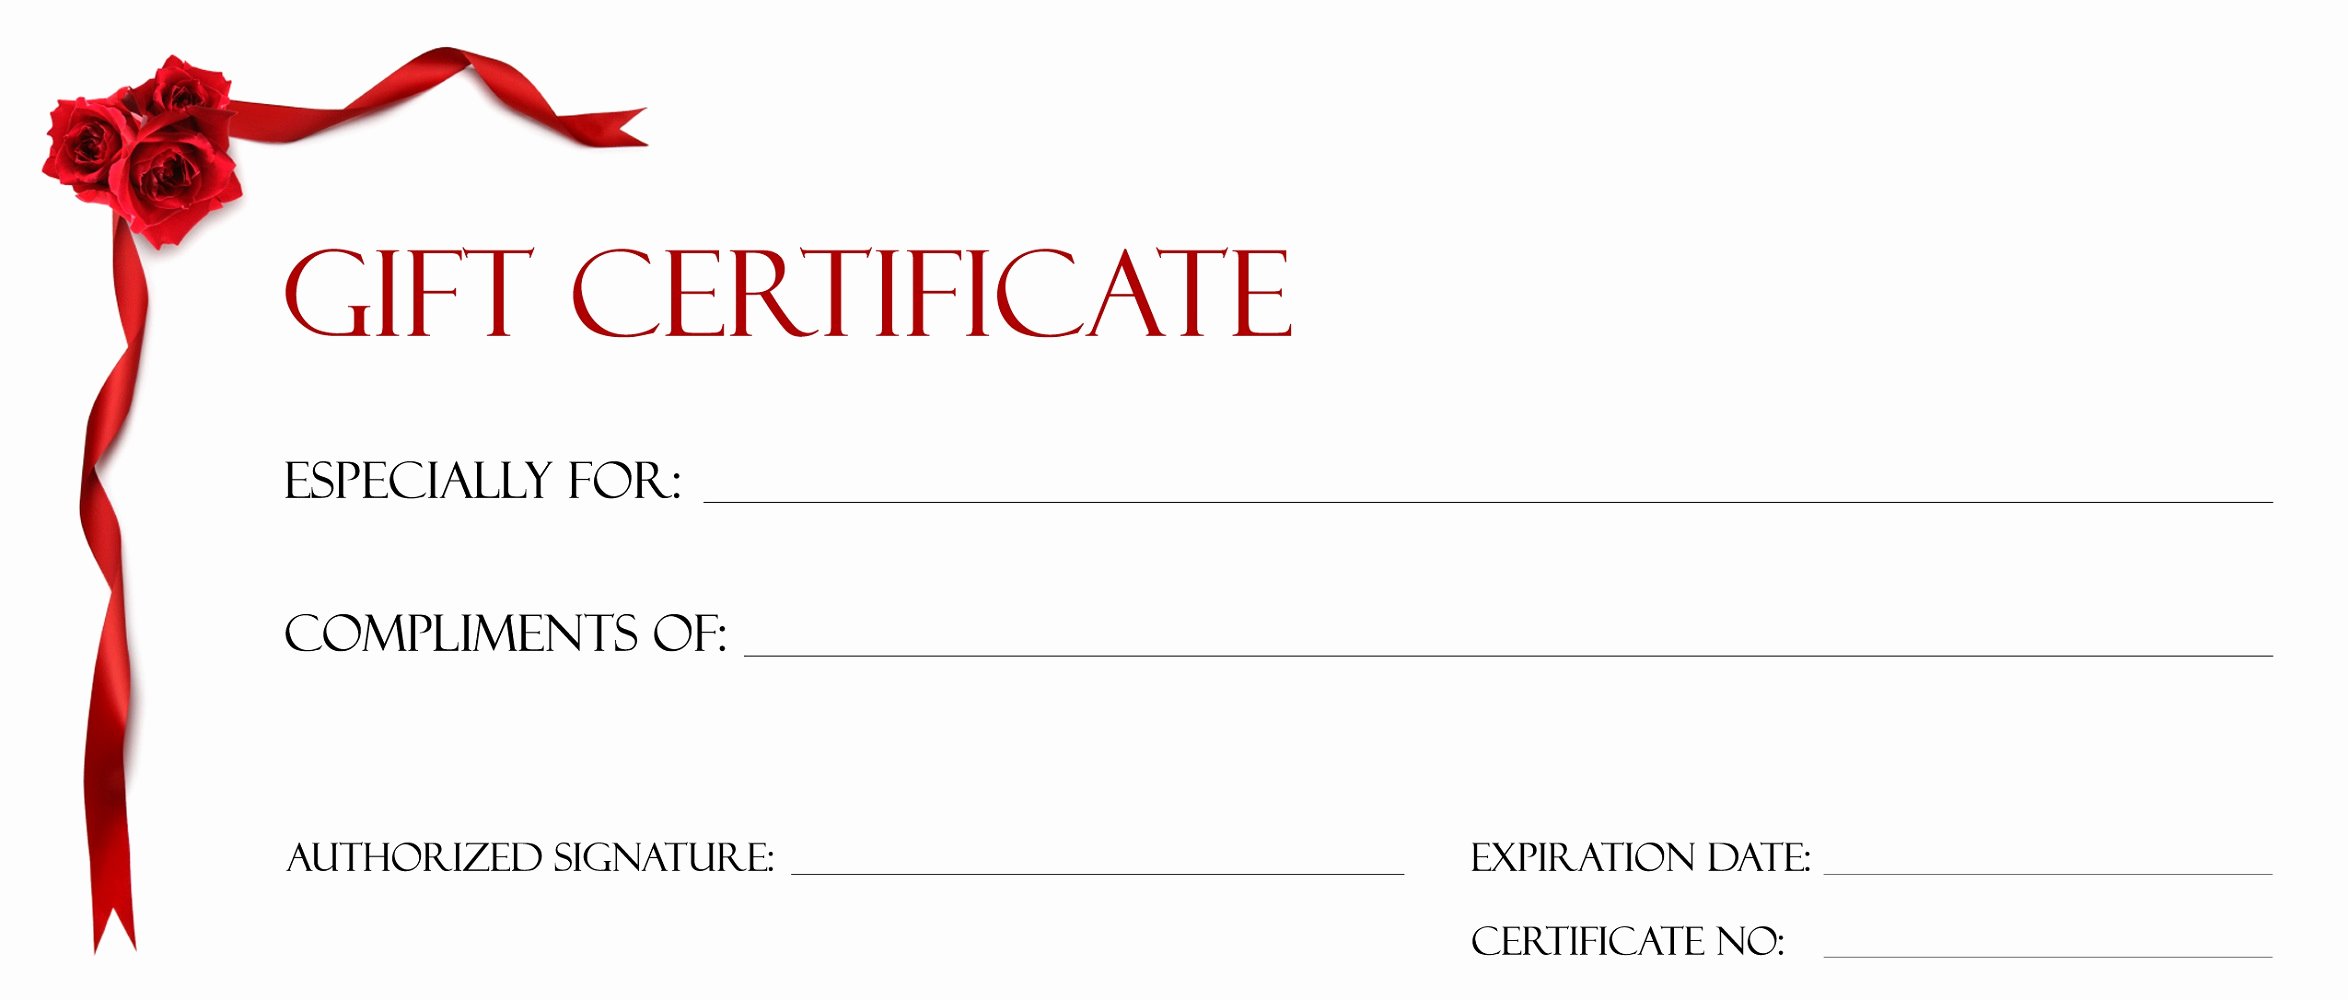 Gift Certificate Templates to Print